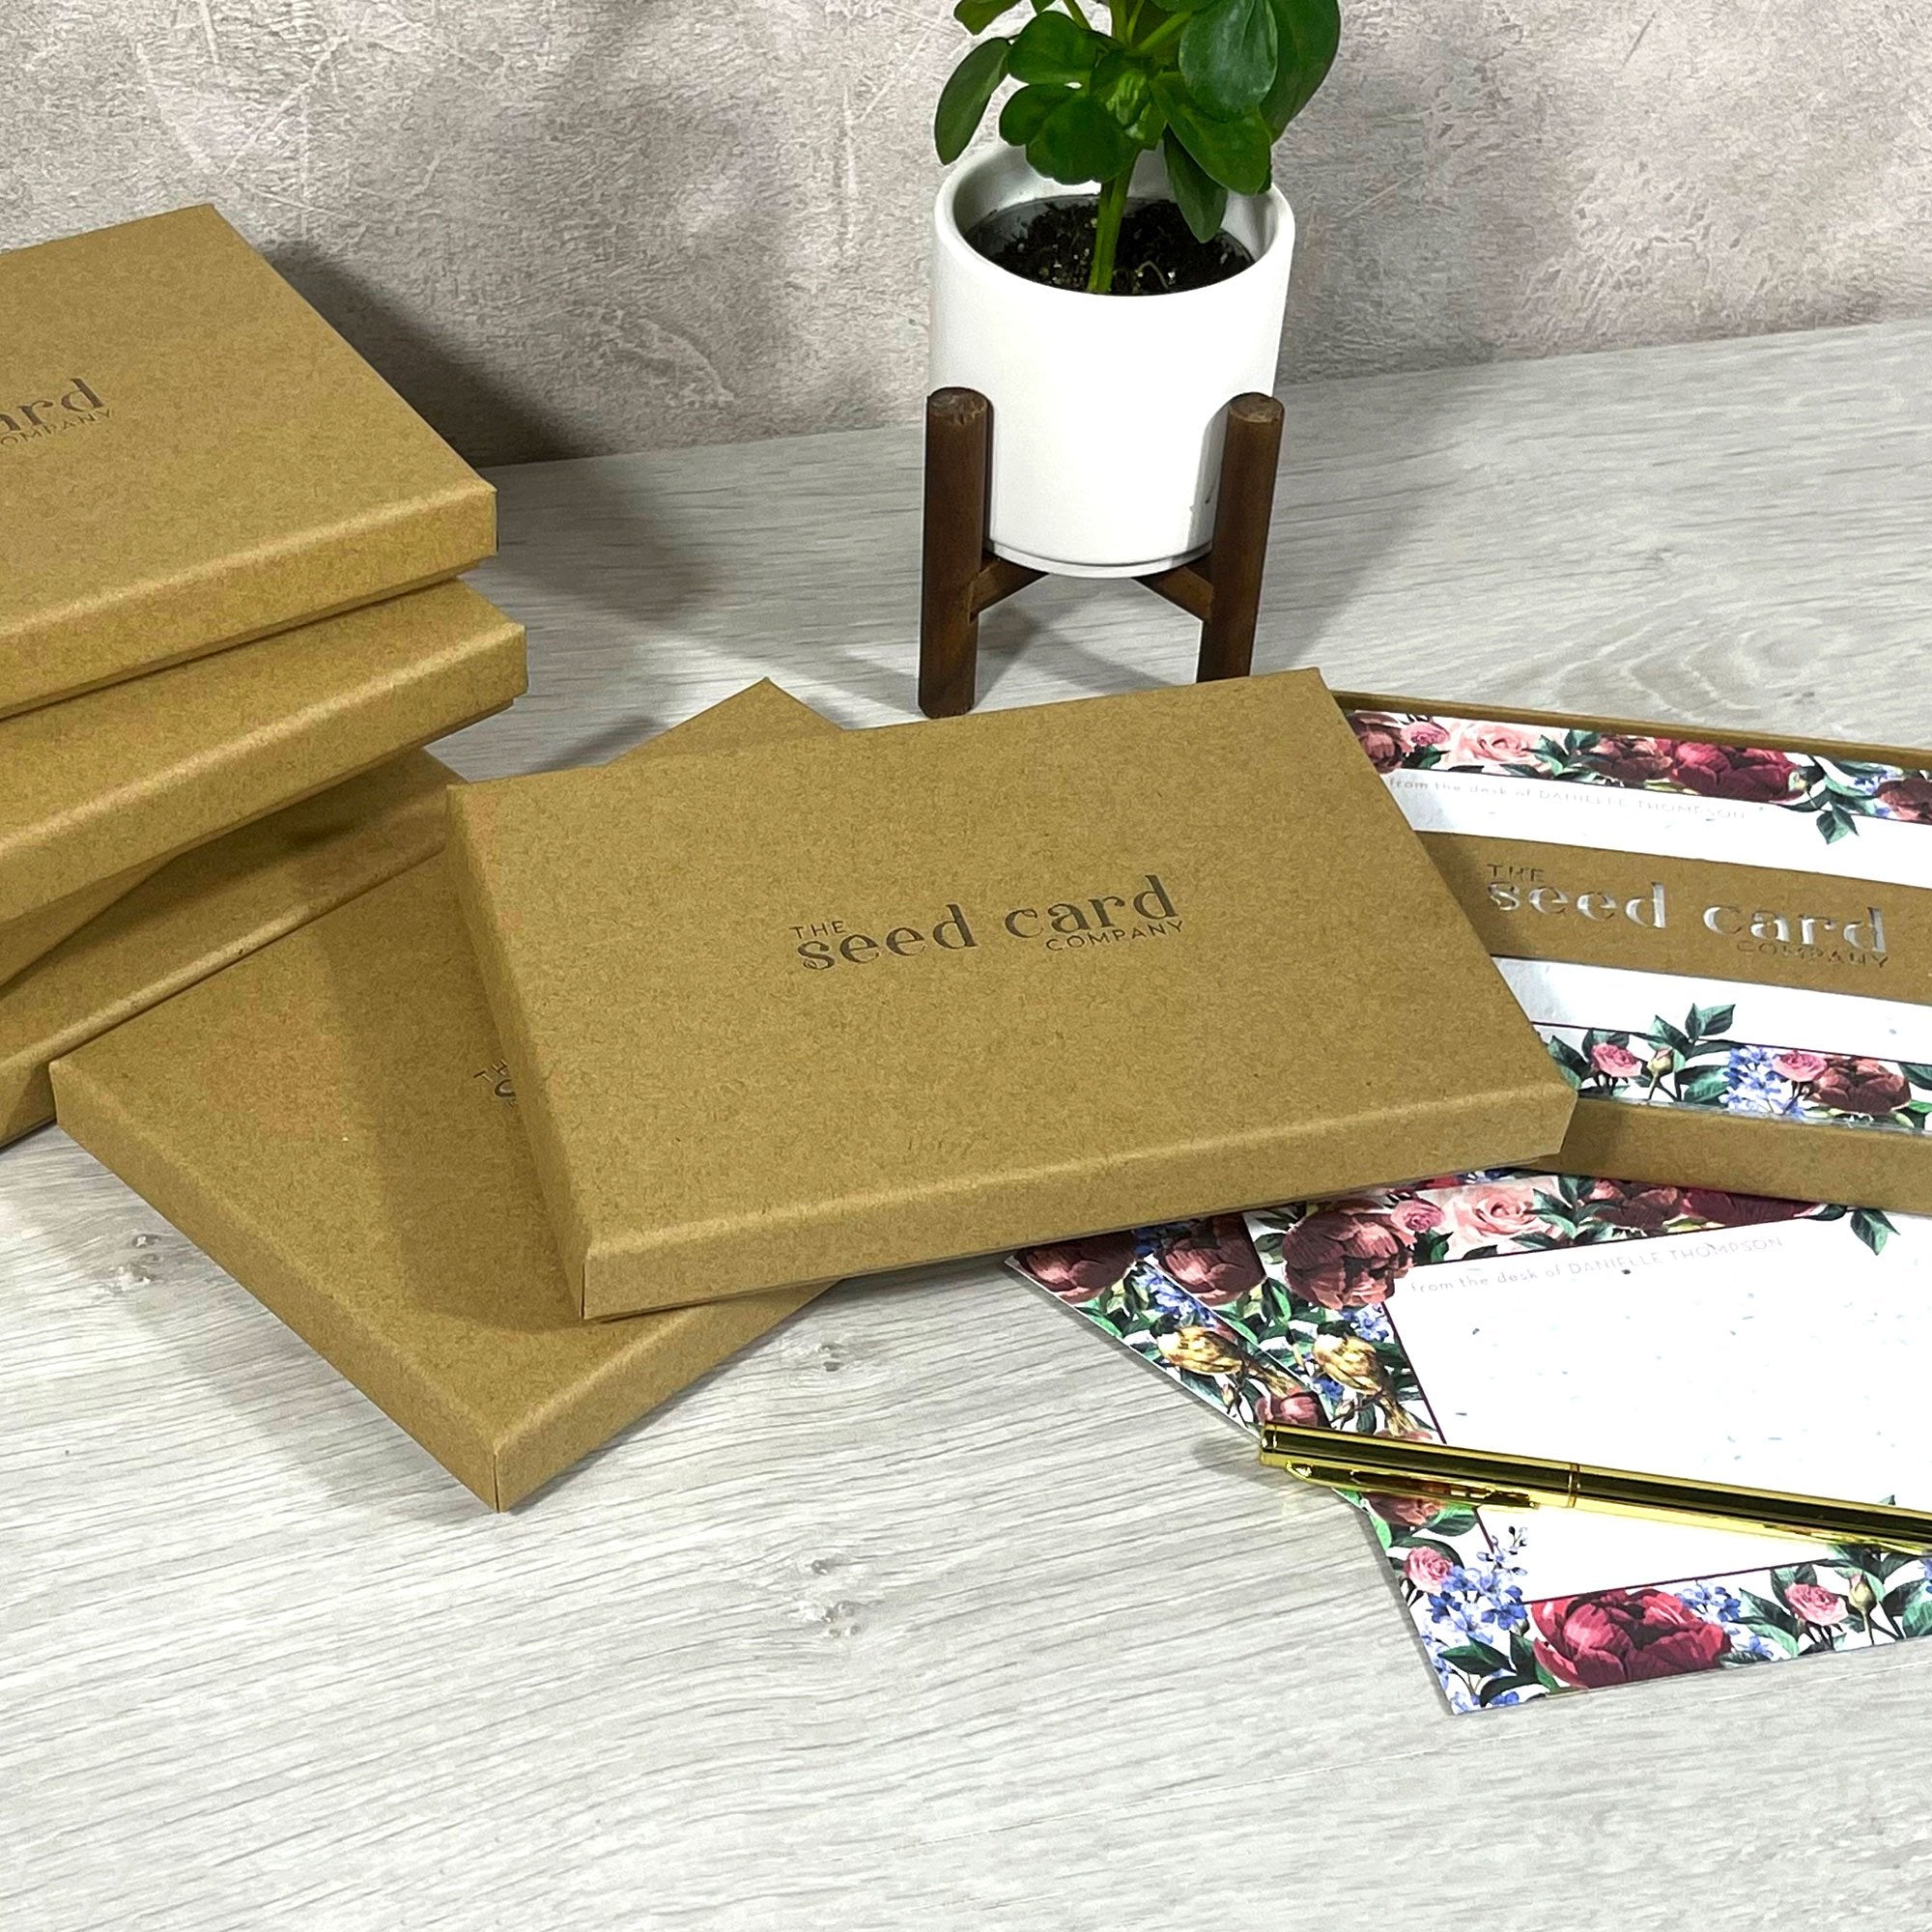 Shop online Rainforest Foliage - 100% biodegradable seed-embedded cards Shop -The Seed Card Company